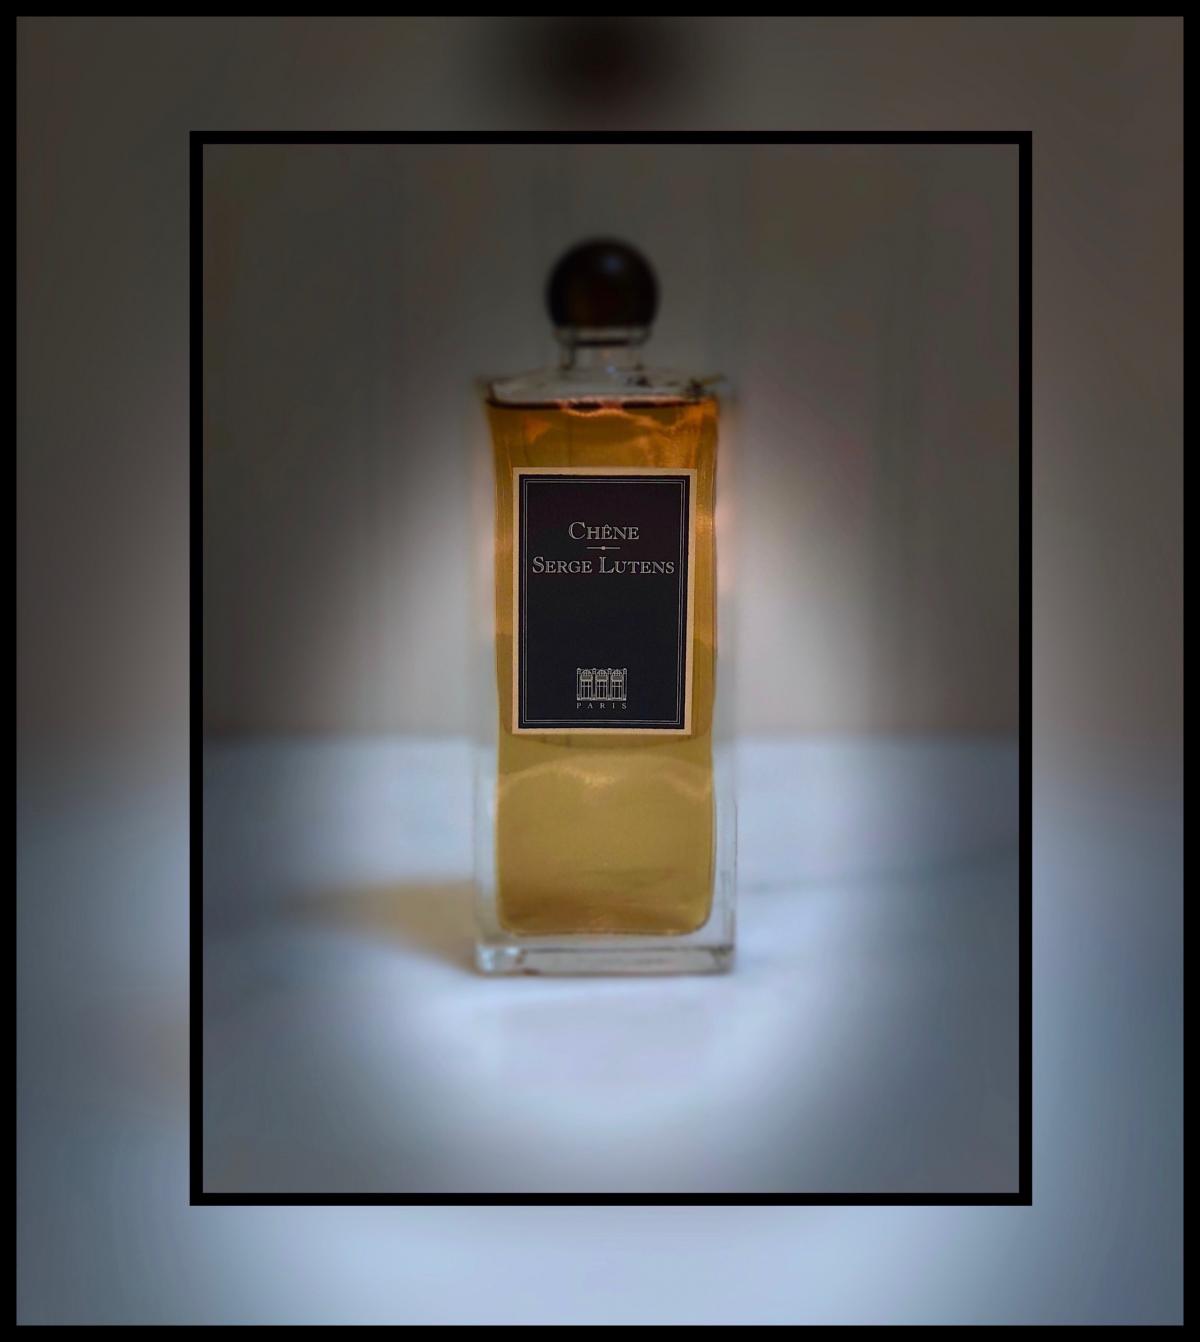 Chene Serge Lutens perfume - a fragrance for women and men 2004